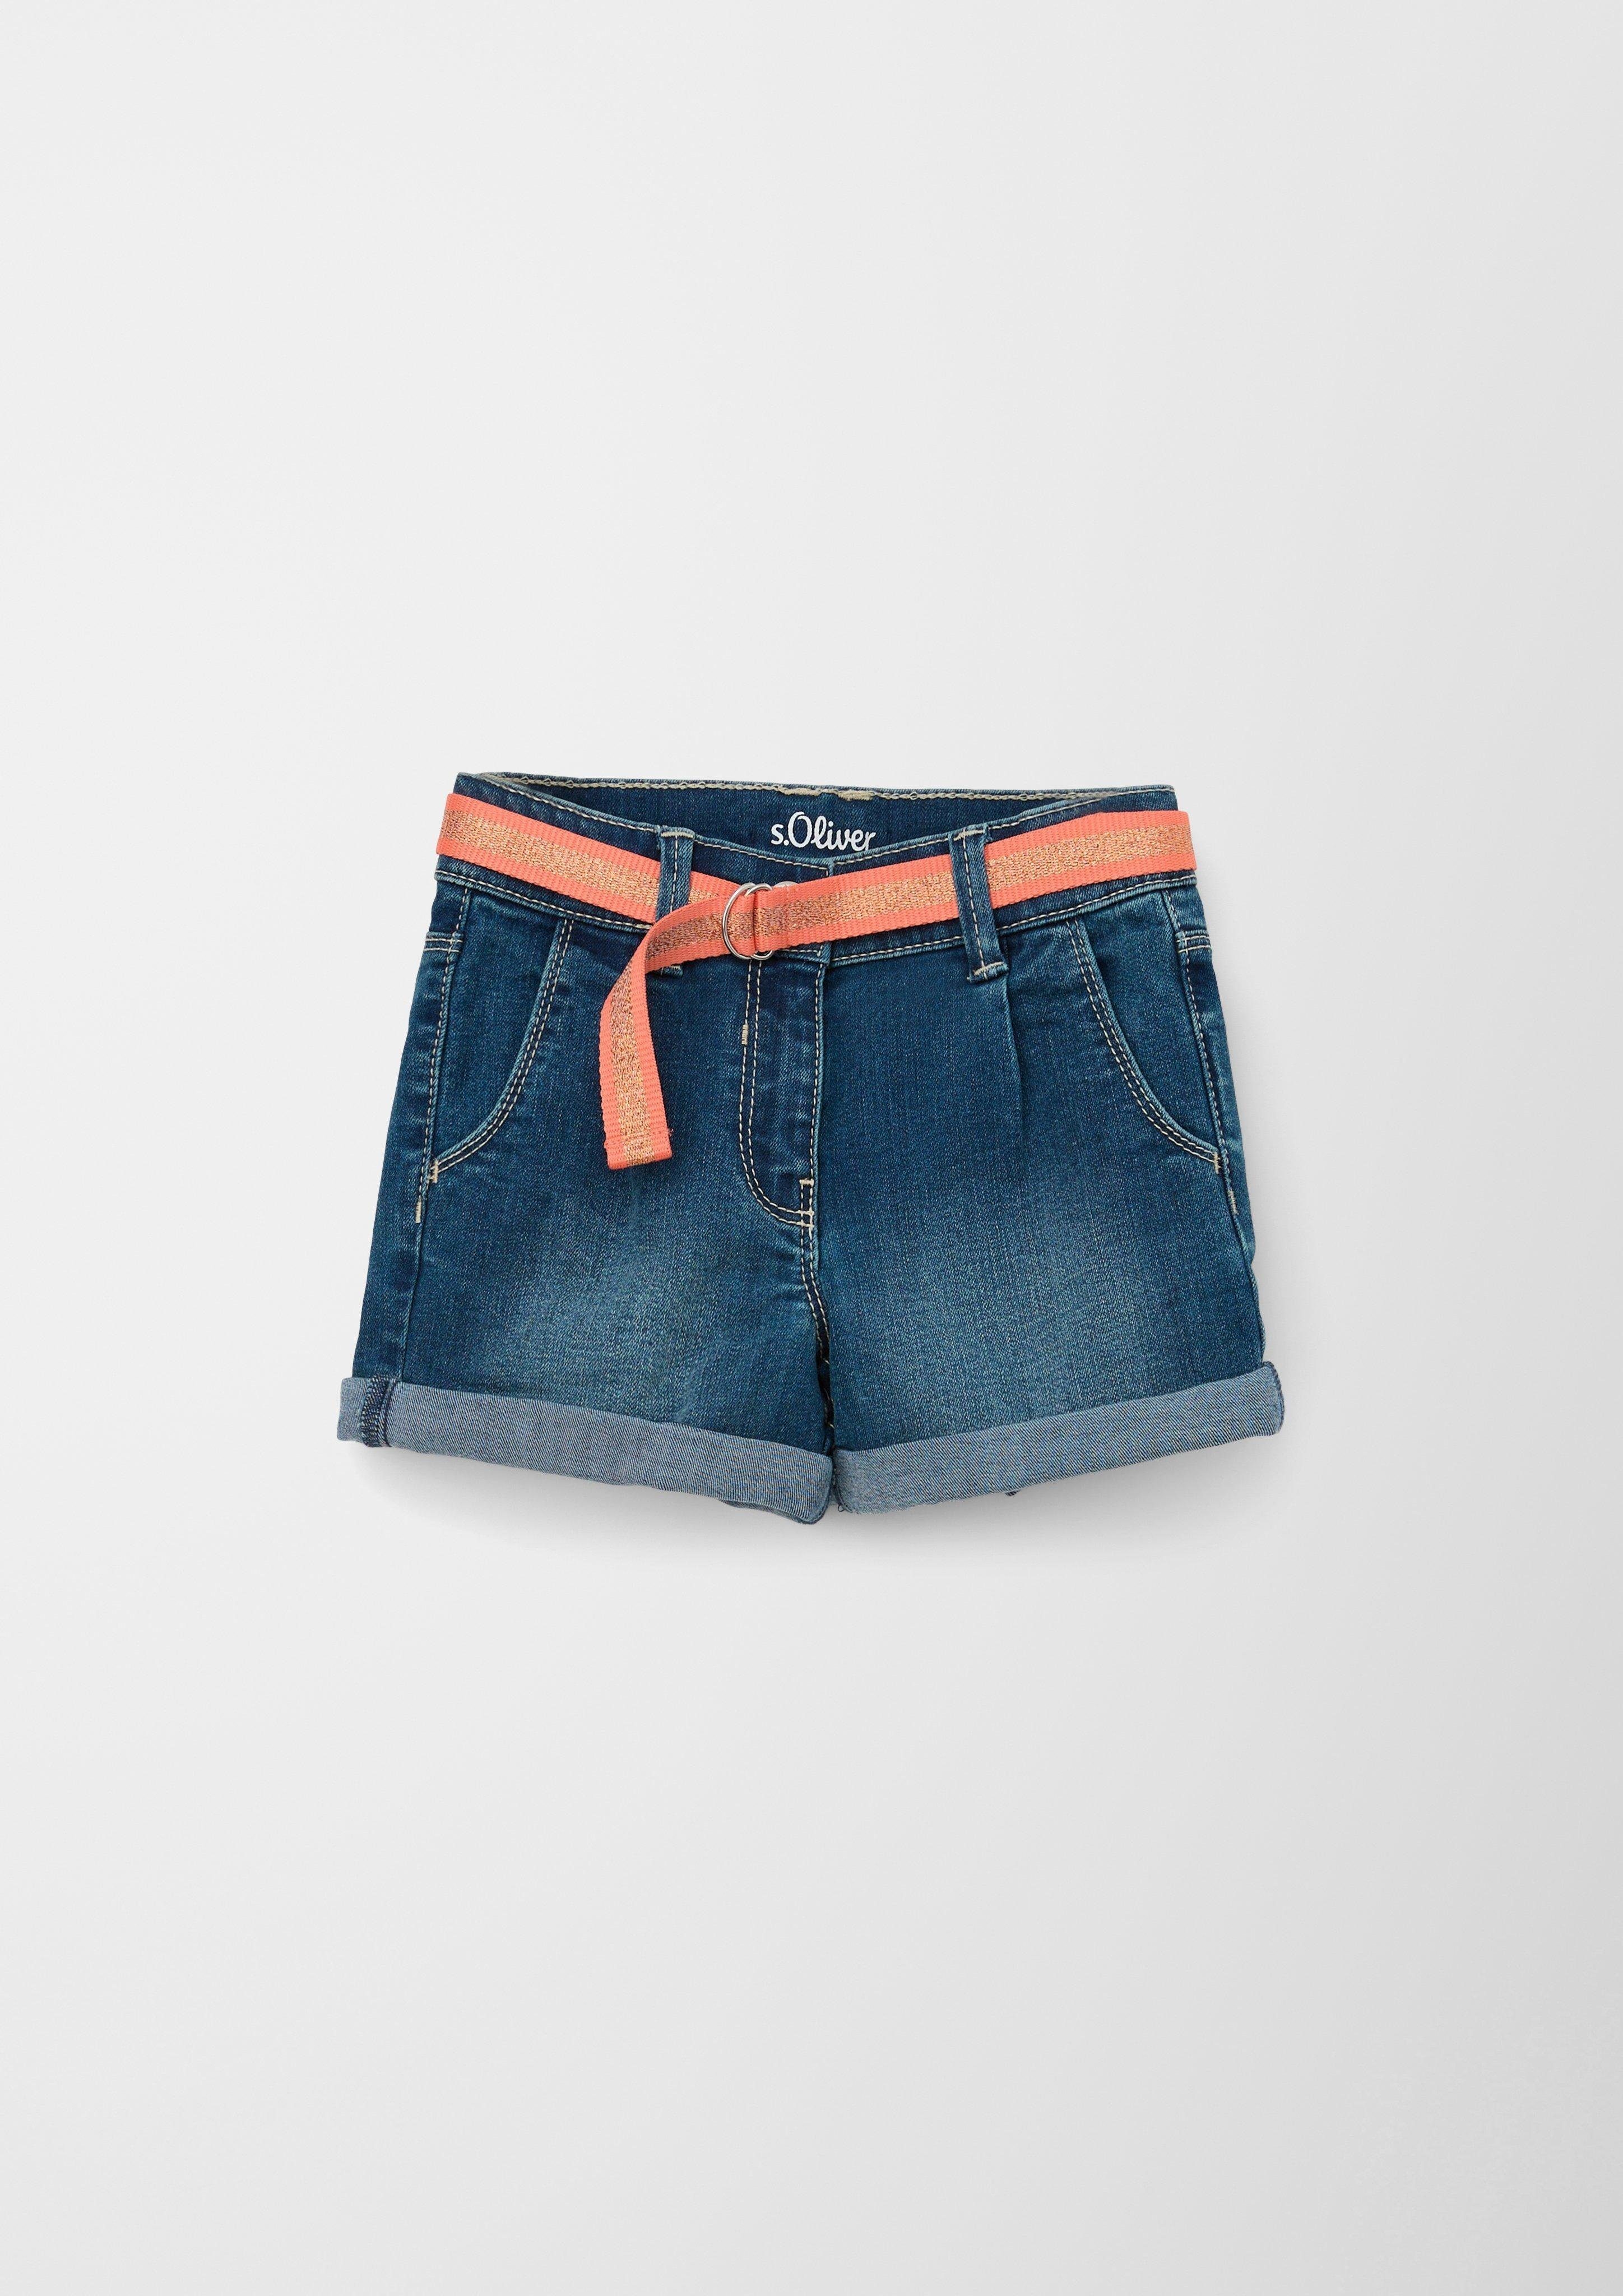 Wide / High Rise Jeansshorts Fit Waschung s.Oliver Leg / / Loose Jeans-Shorts